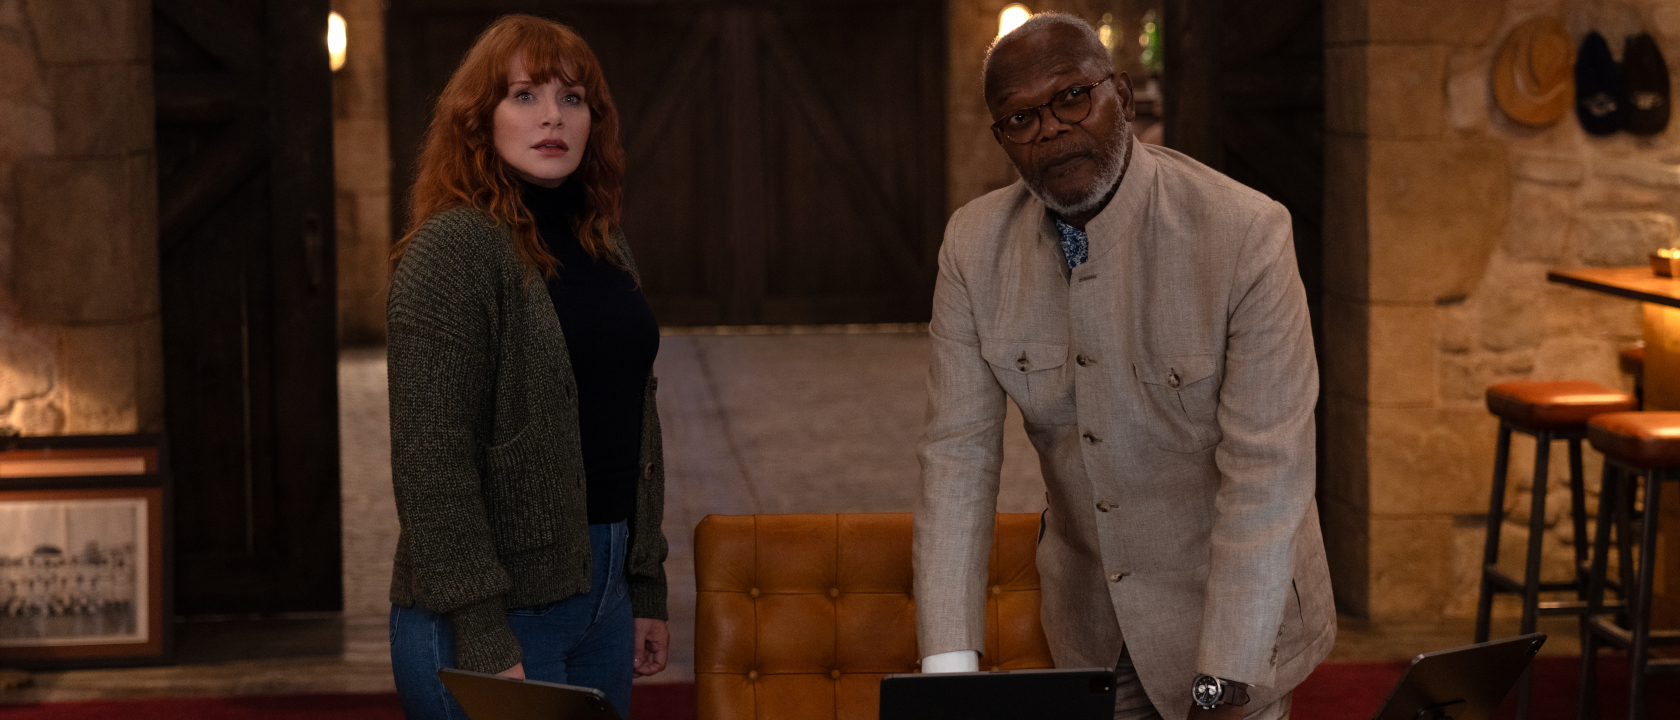 Bryce Dallas Howard and Samuel L. Jackson stand together at a desk in Argylle.